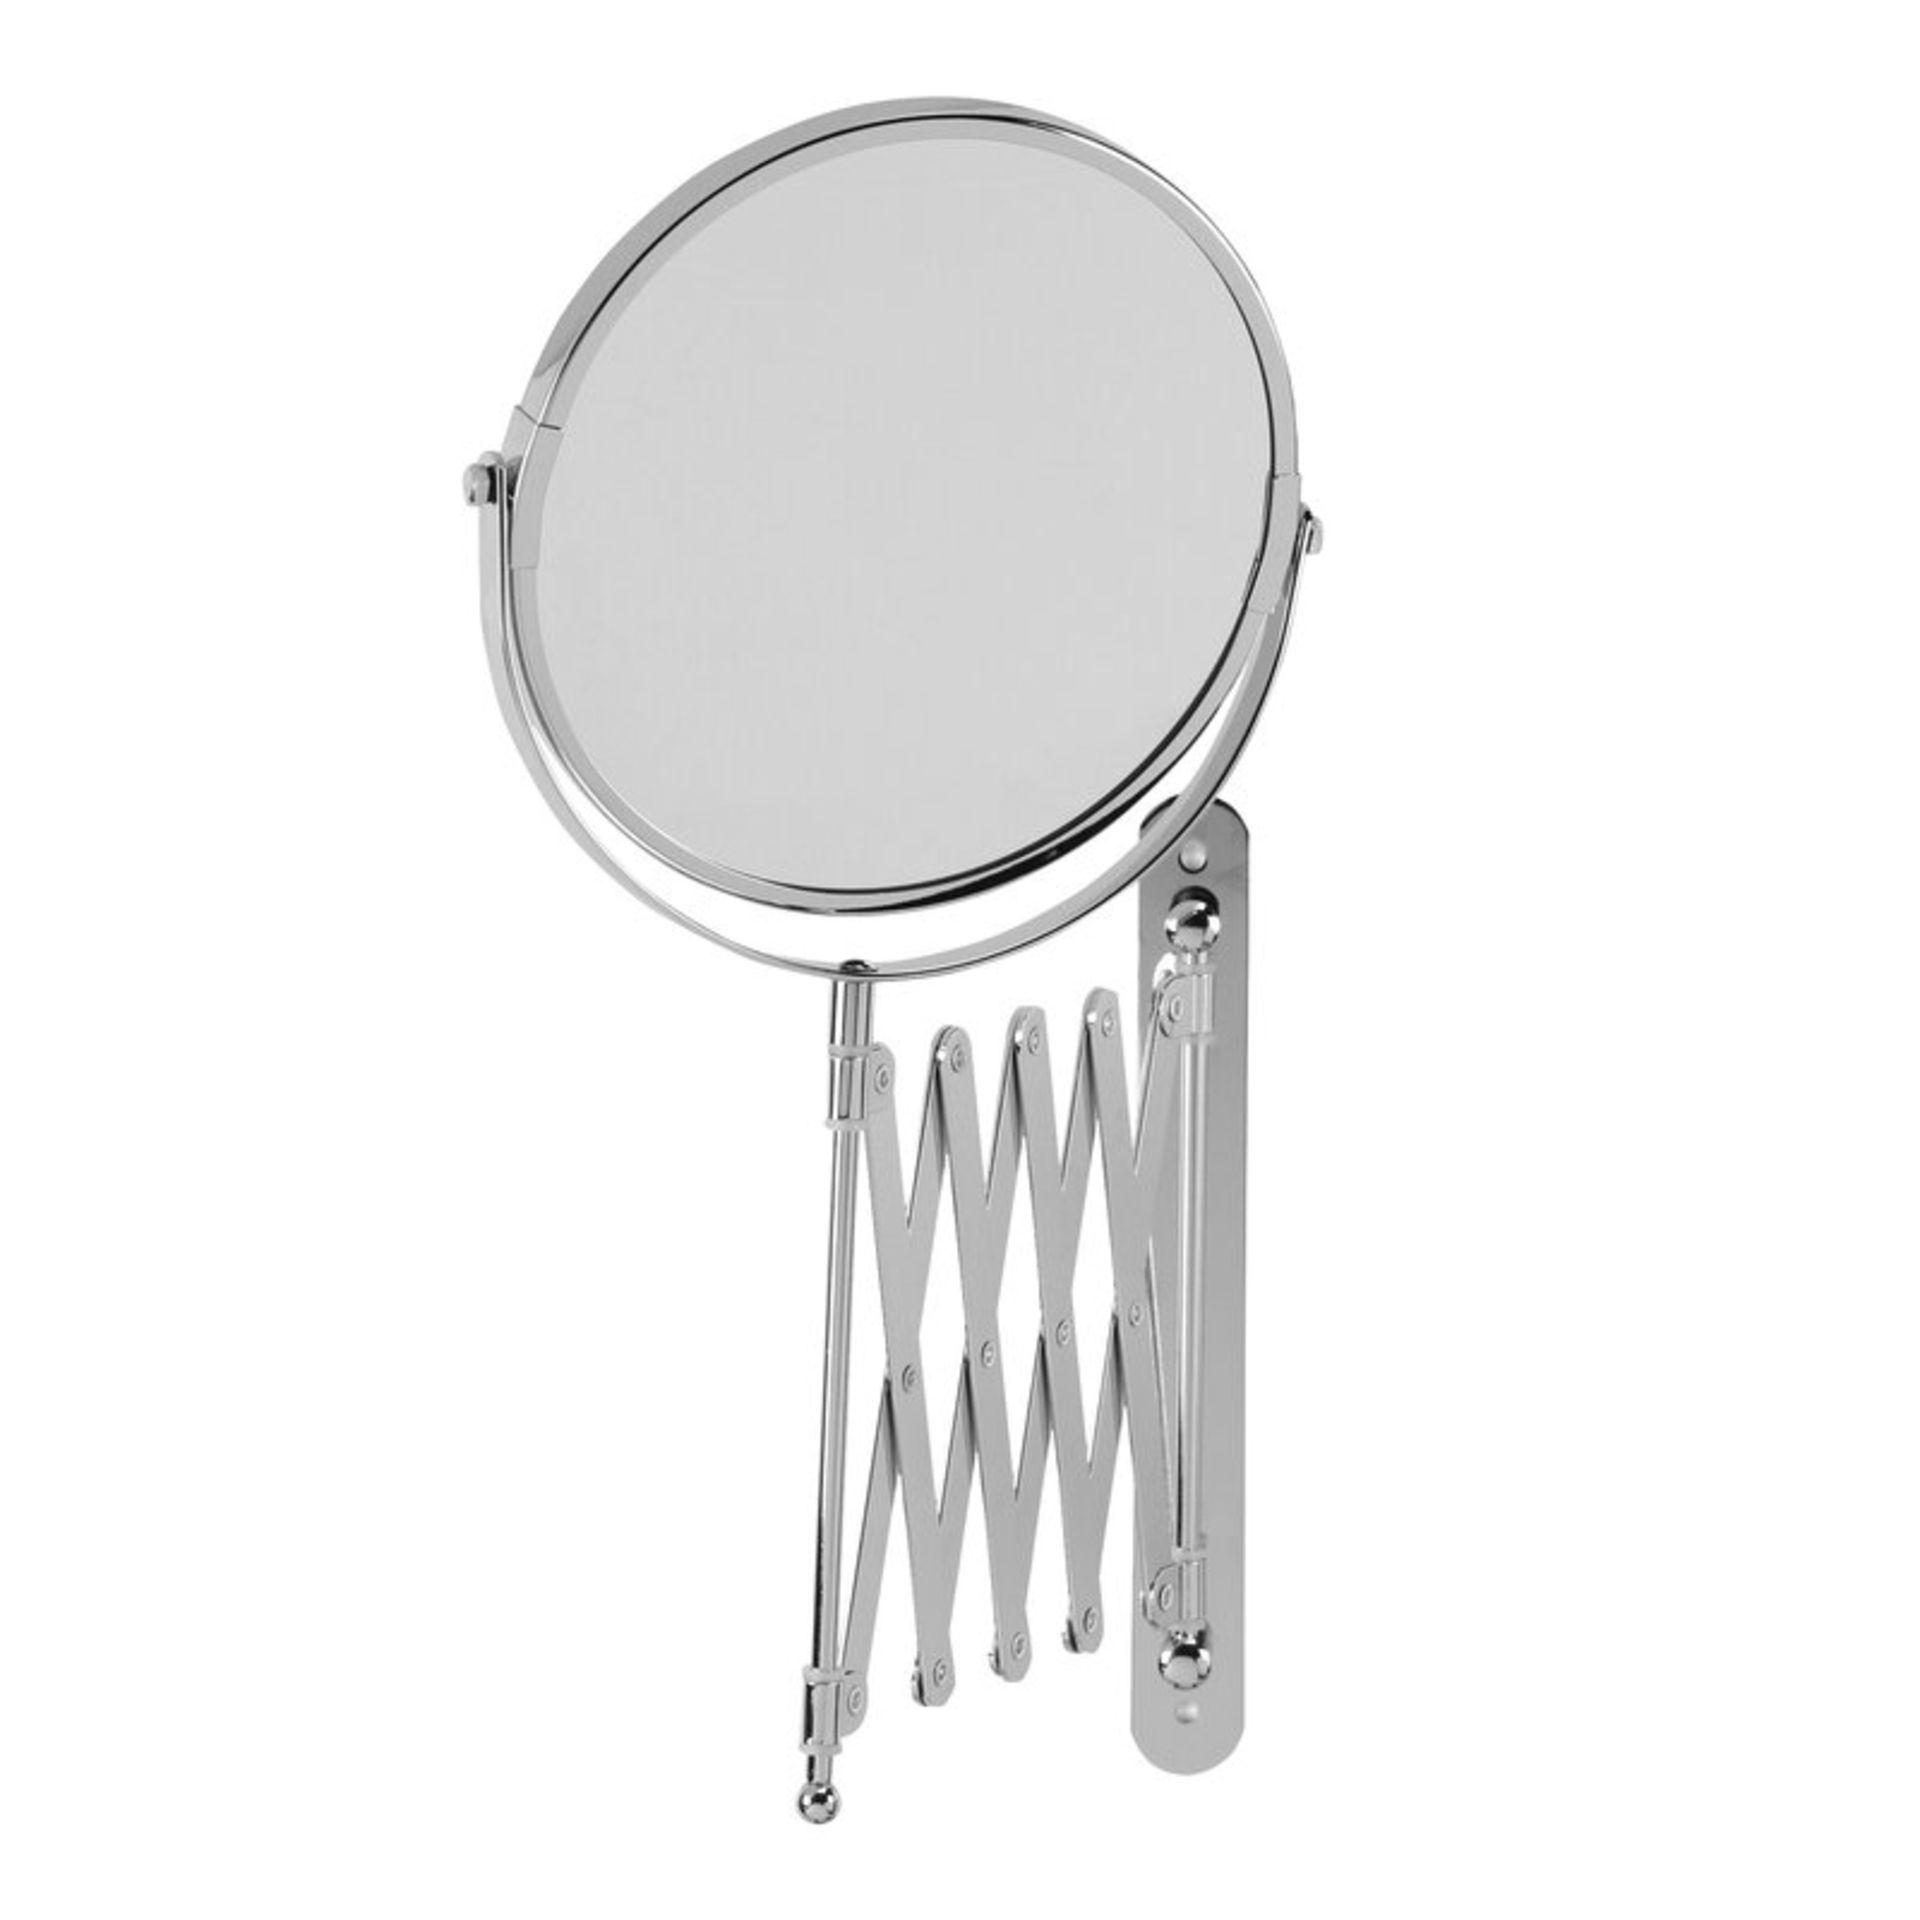 ABLE MAGNIFYING BATHROOM MIRROR RRP £38.99Condition ReportAppraisal Available on Request- All